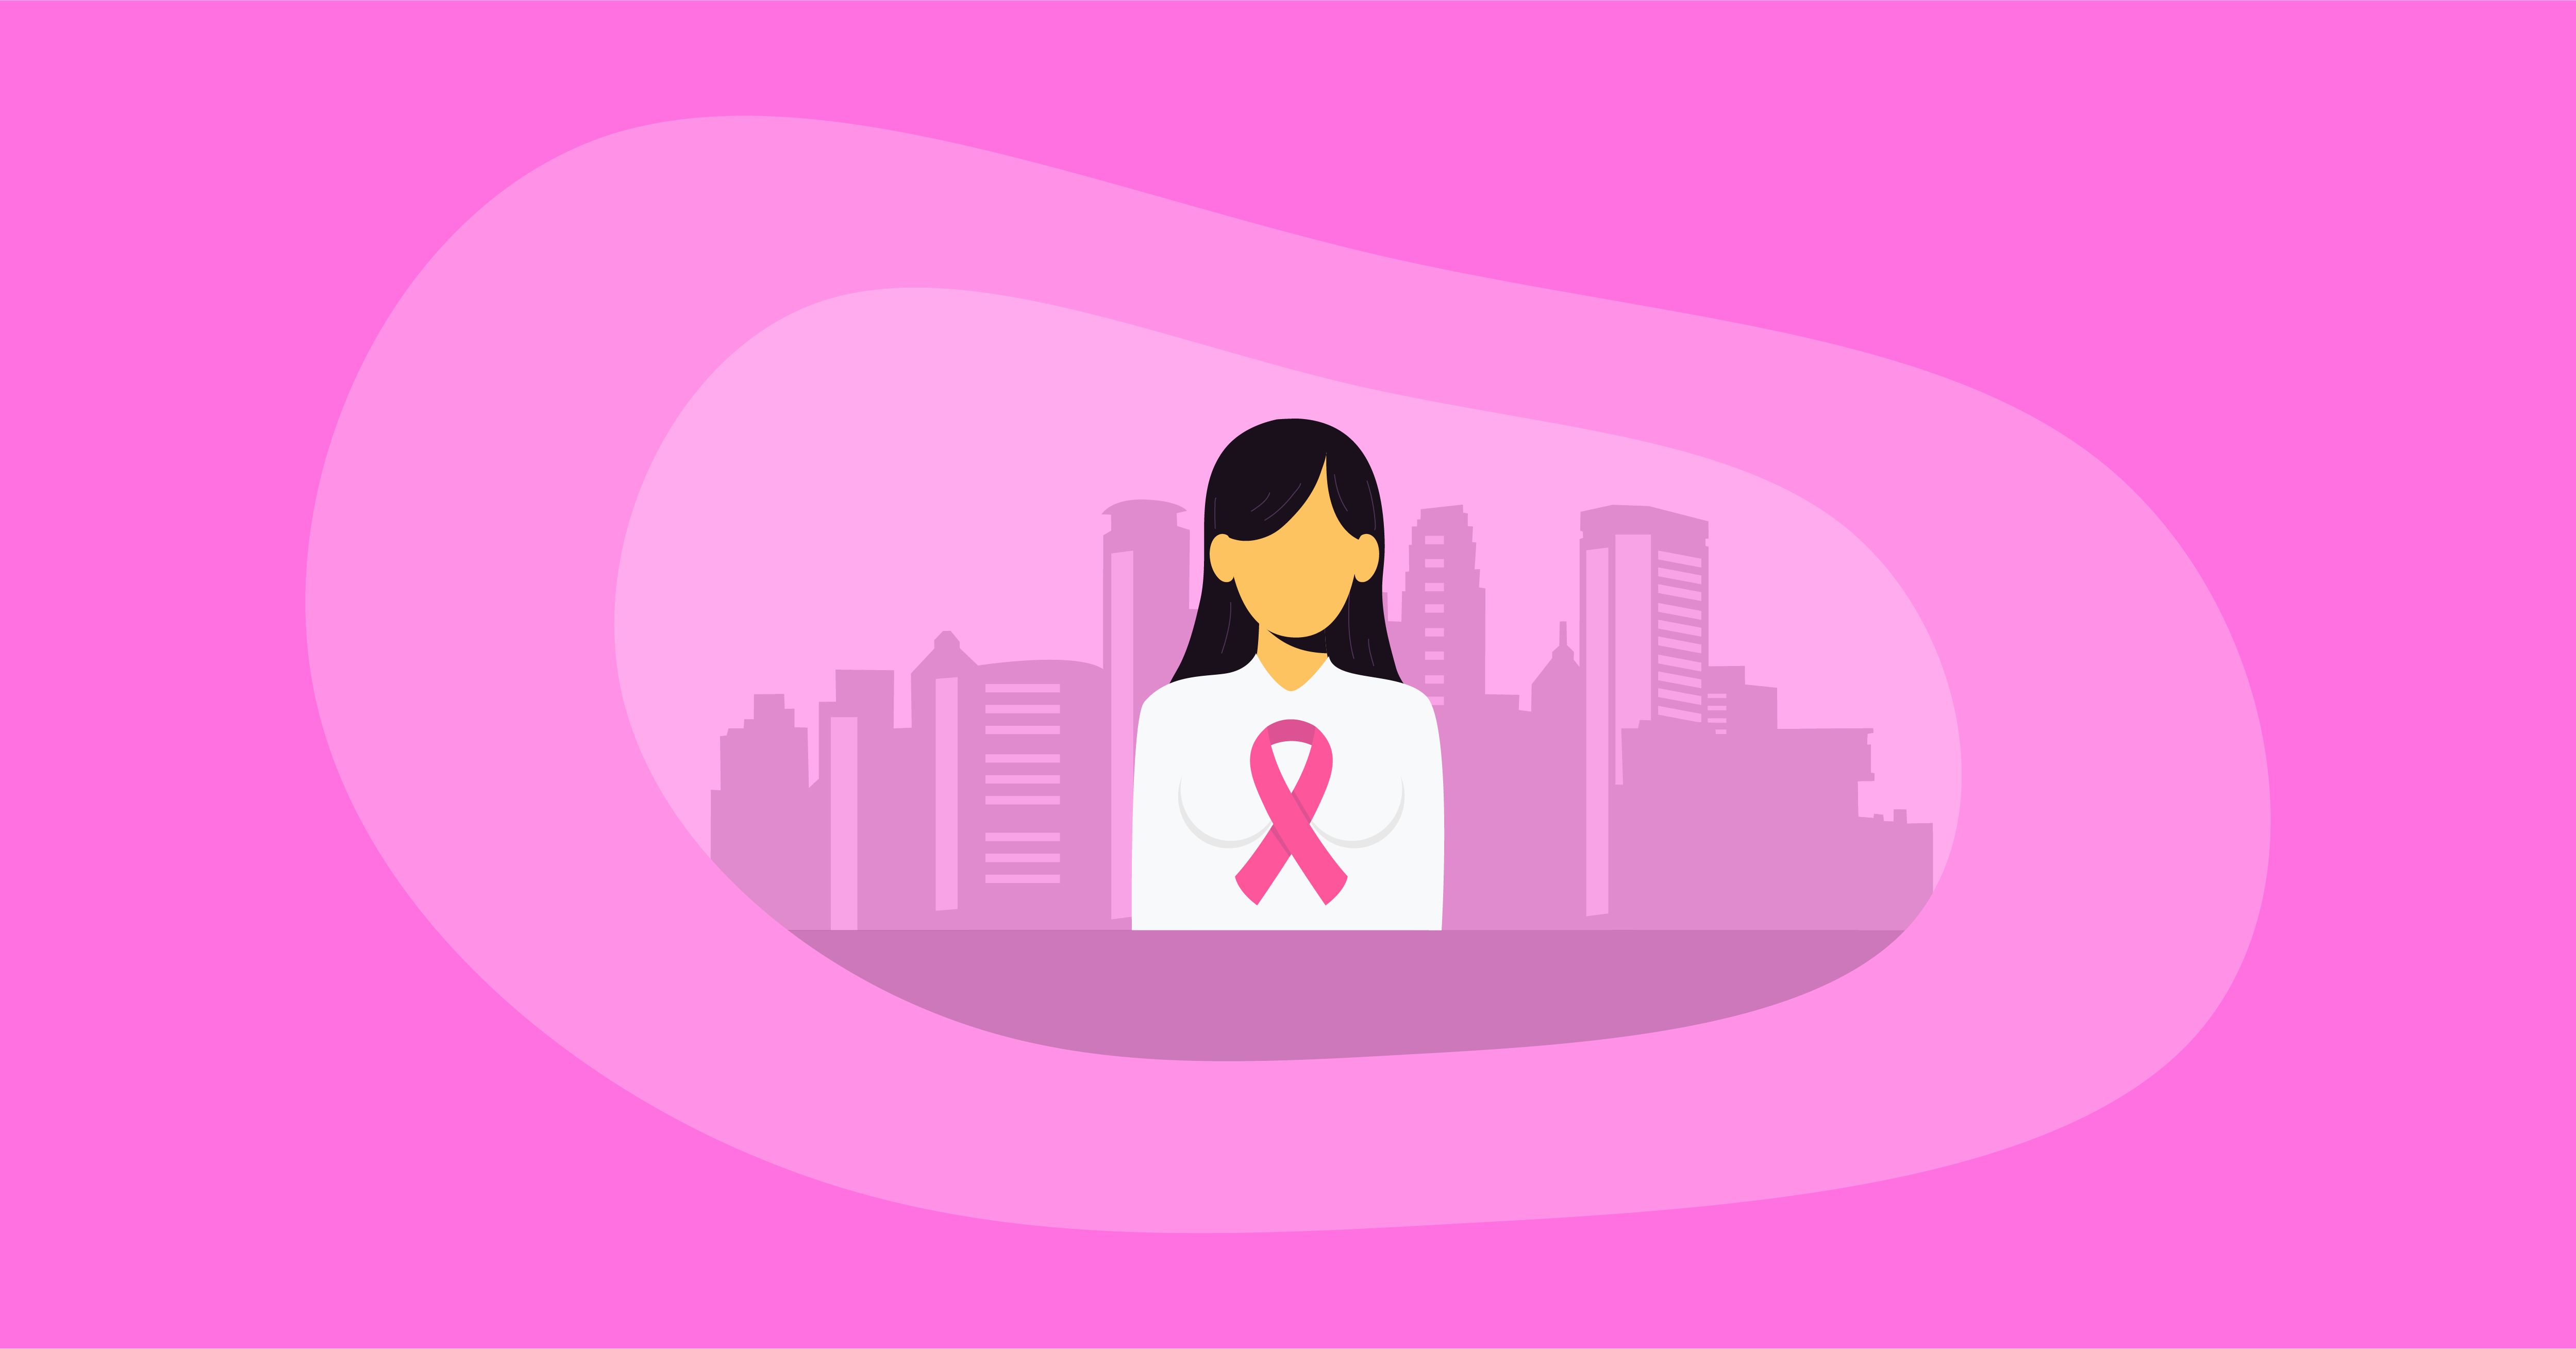 Attempted illustration of a person with breast cancer